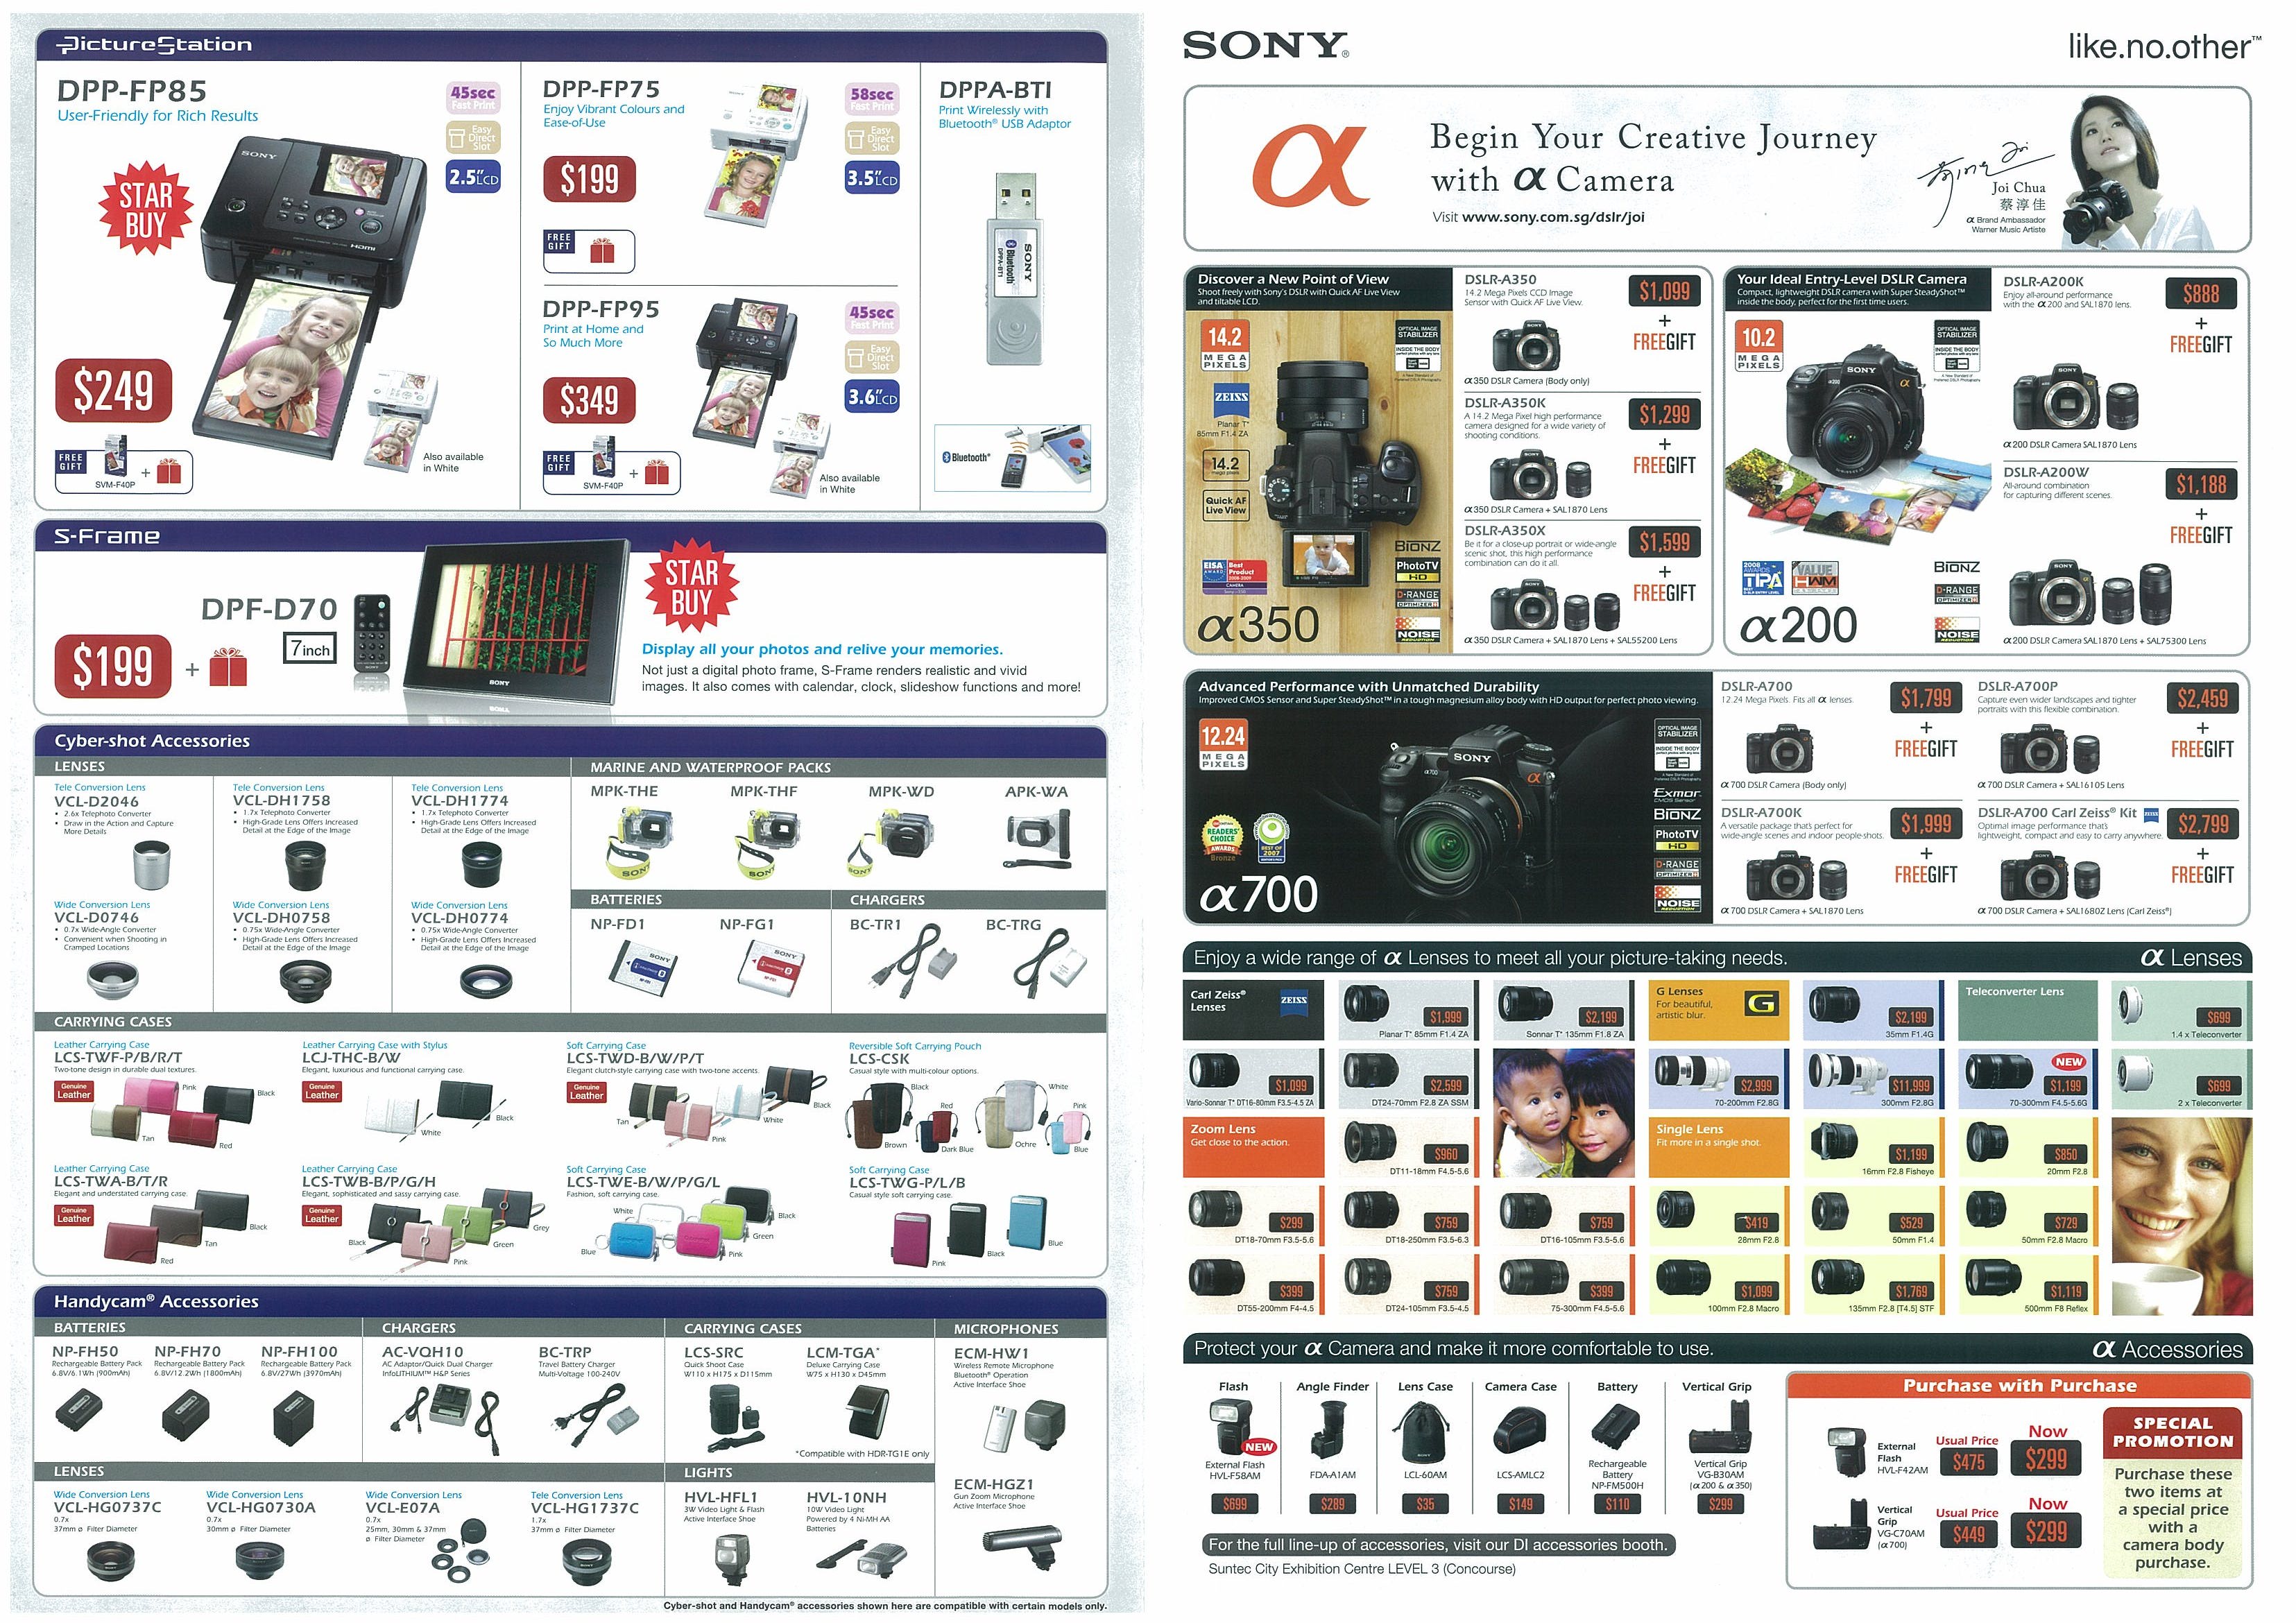 Comex 2008 price list image brochure of Sony Handycam Page 2